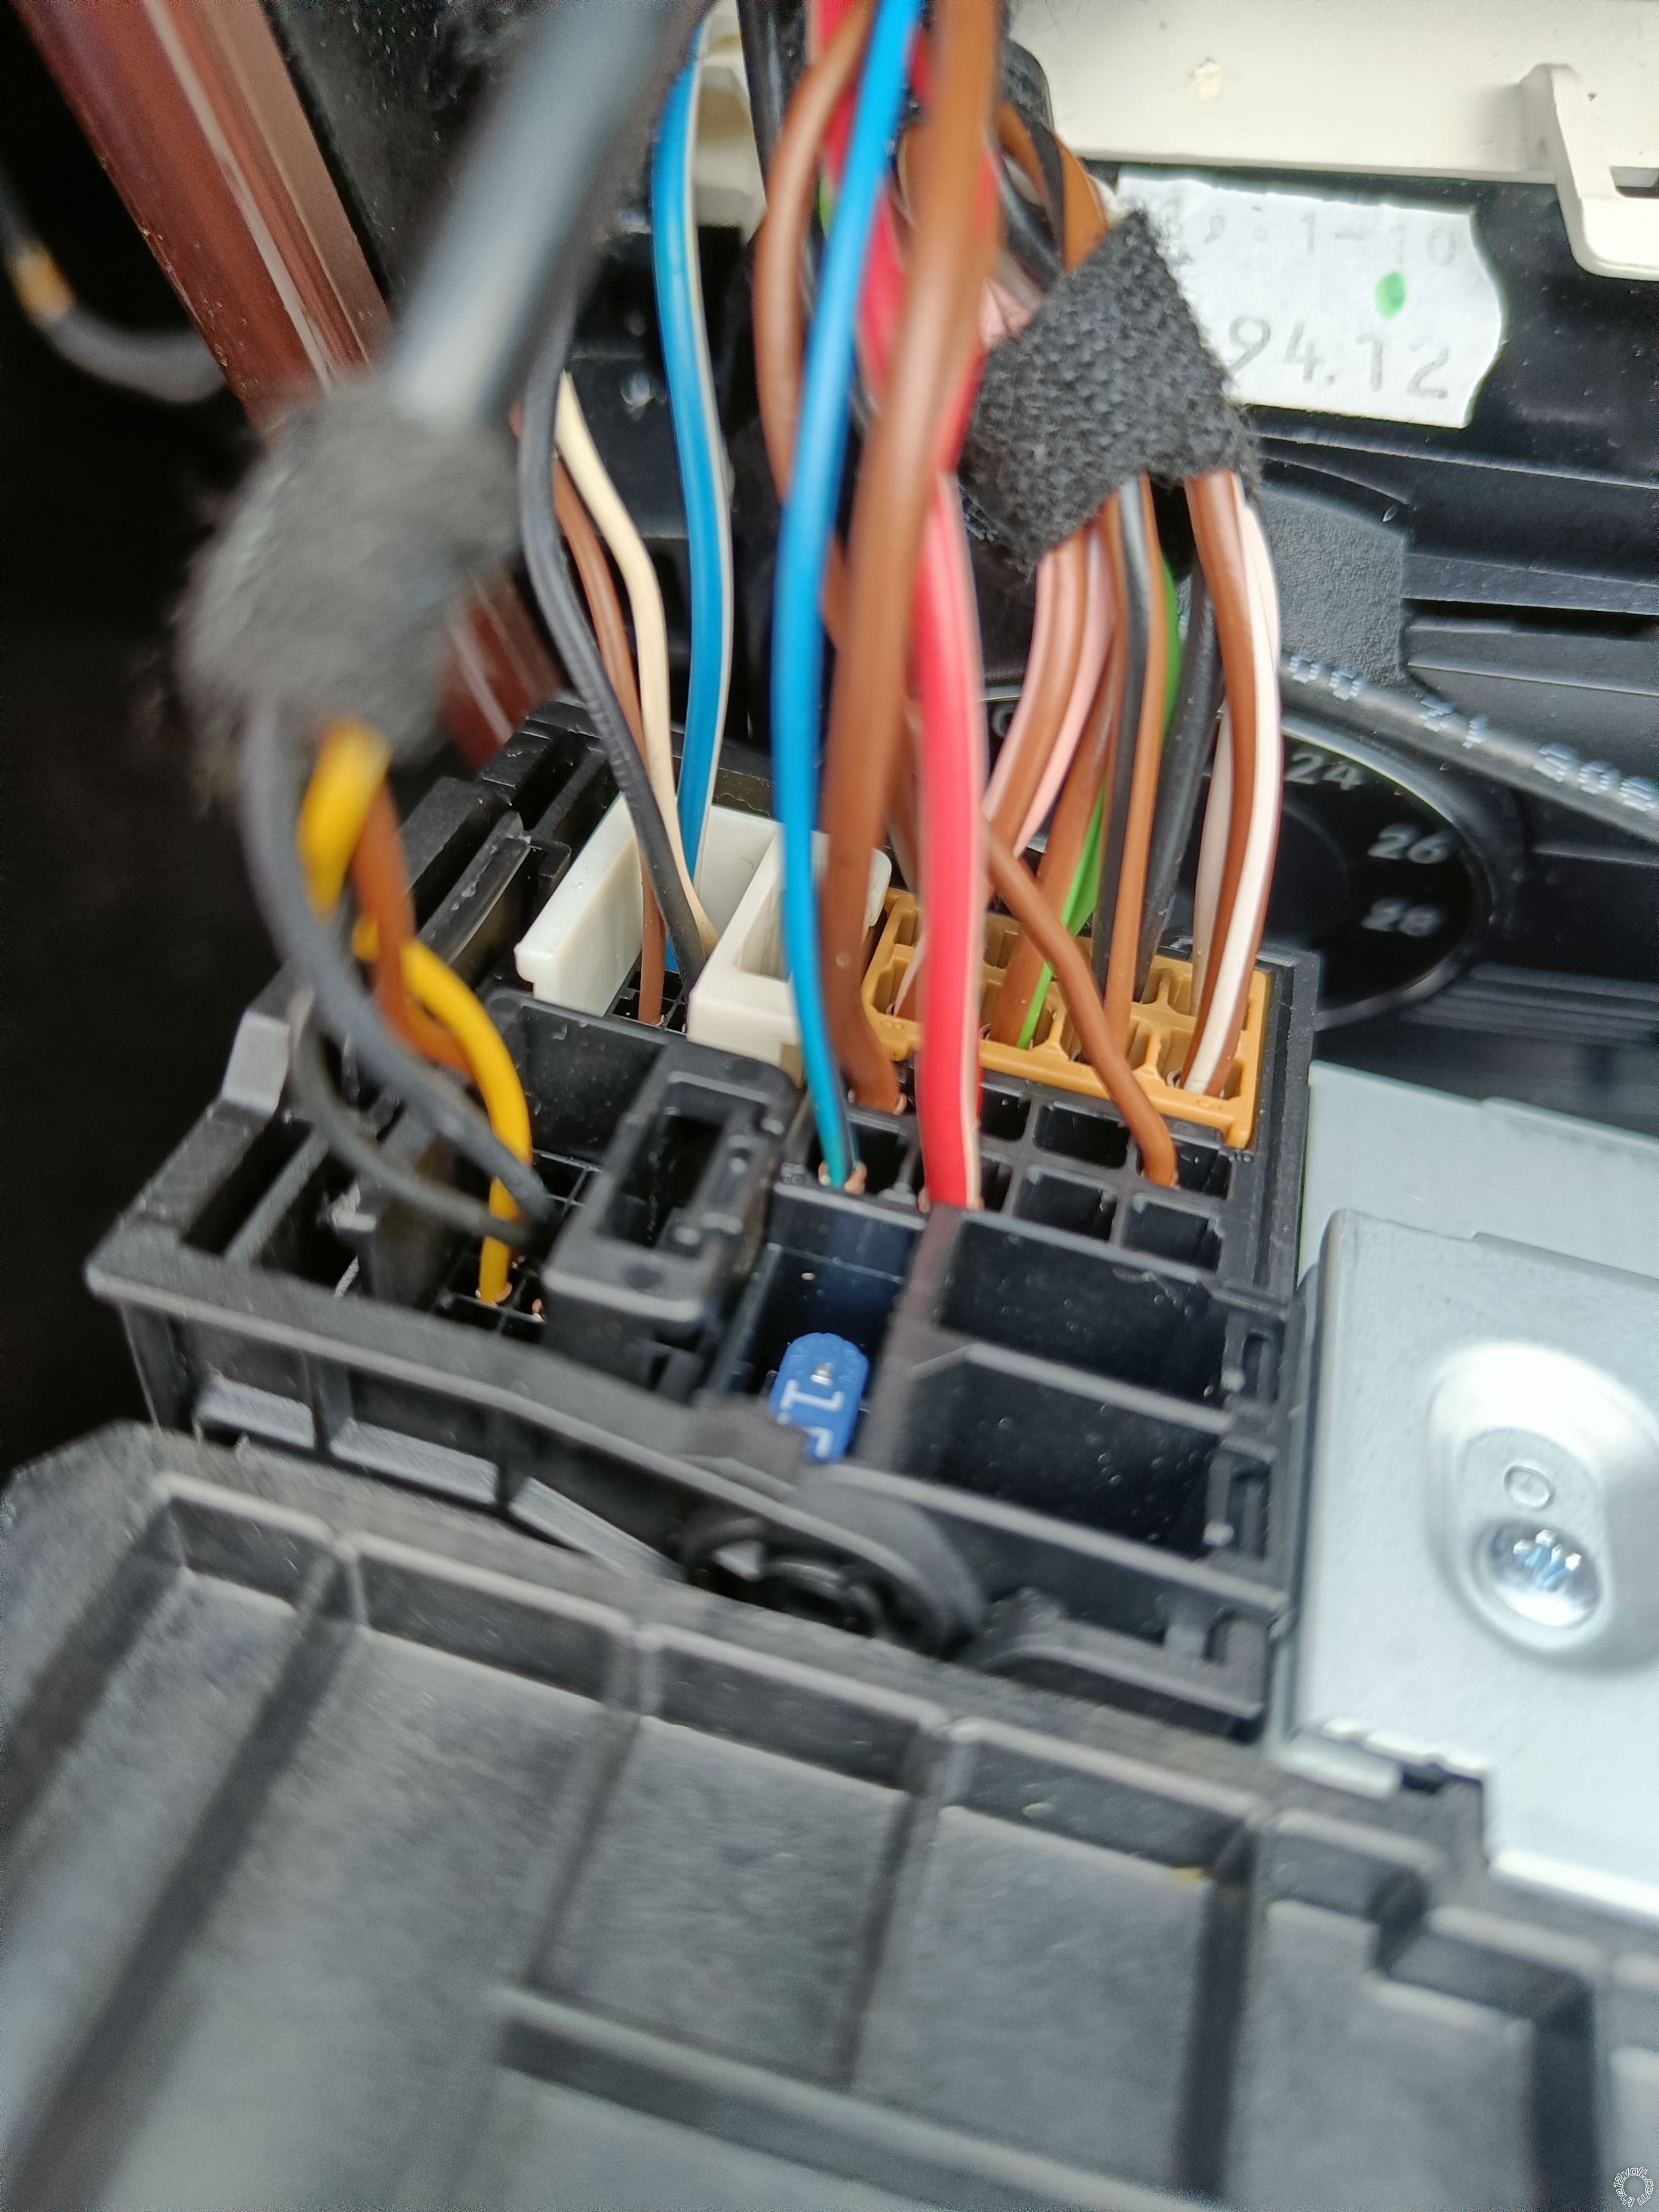 2010 Mercedes Benz A Class, MF2830 Stock Unit Wiring? -- posted image.